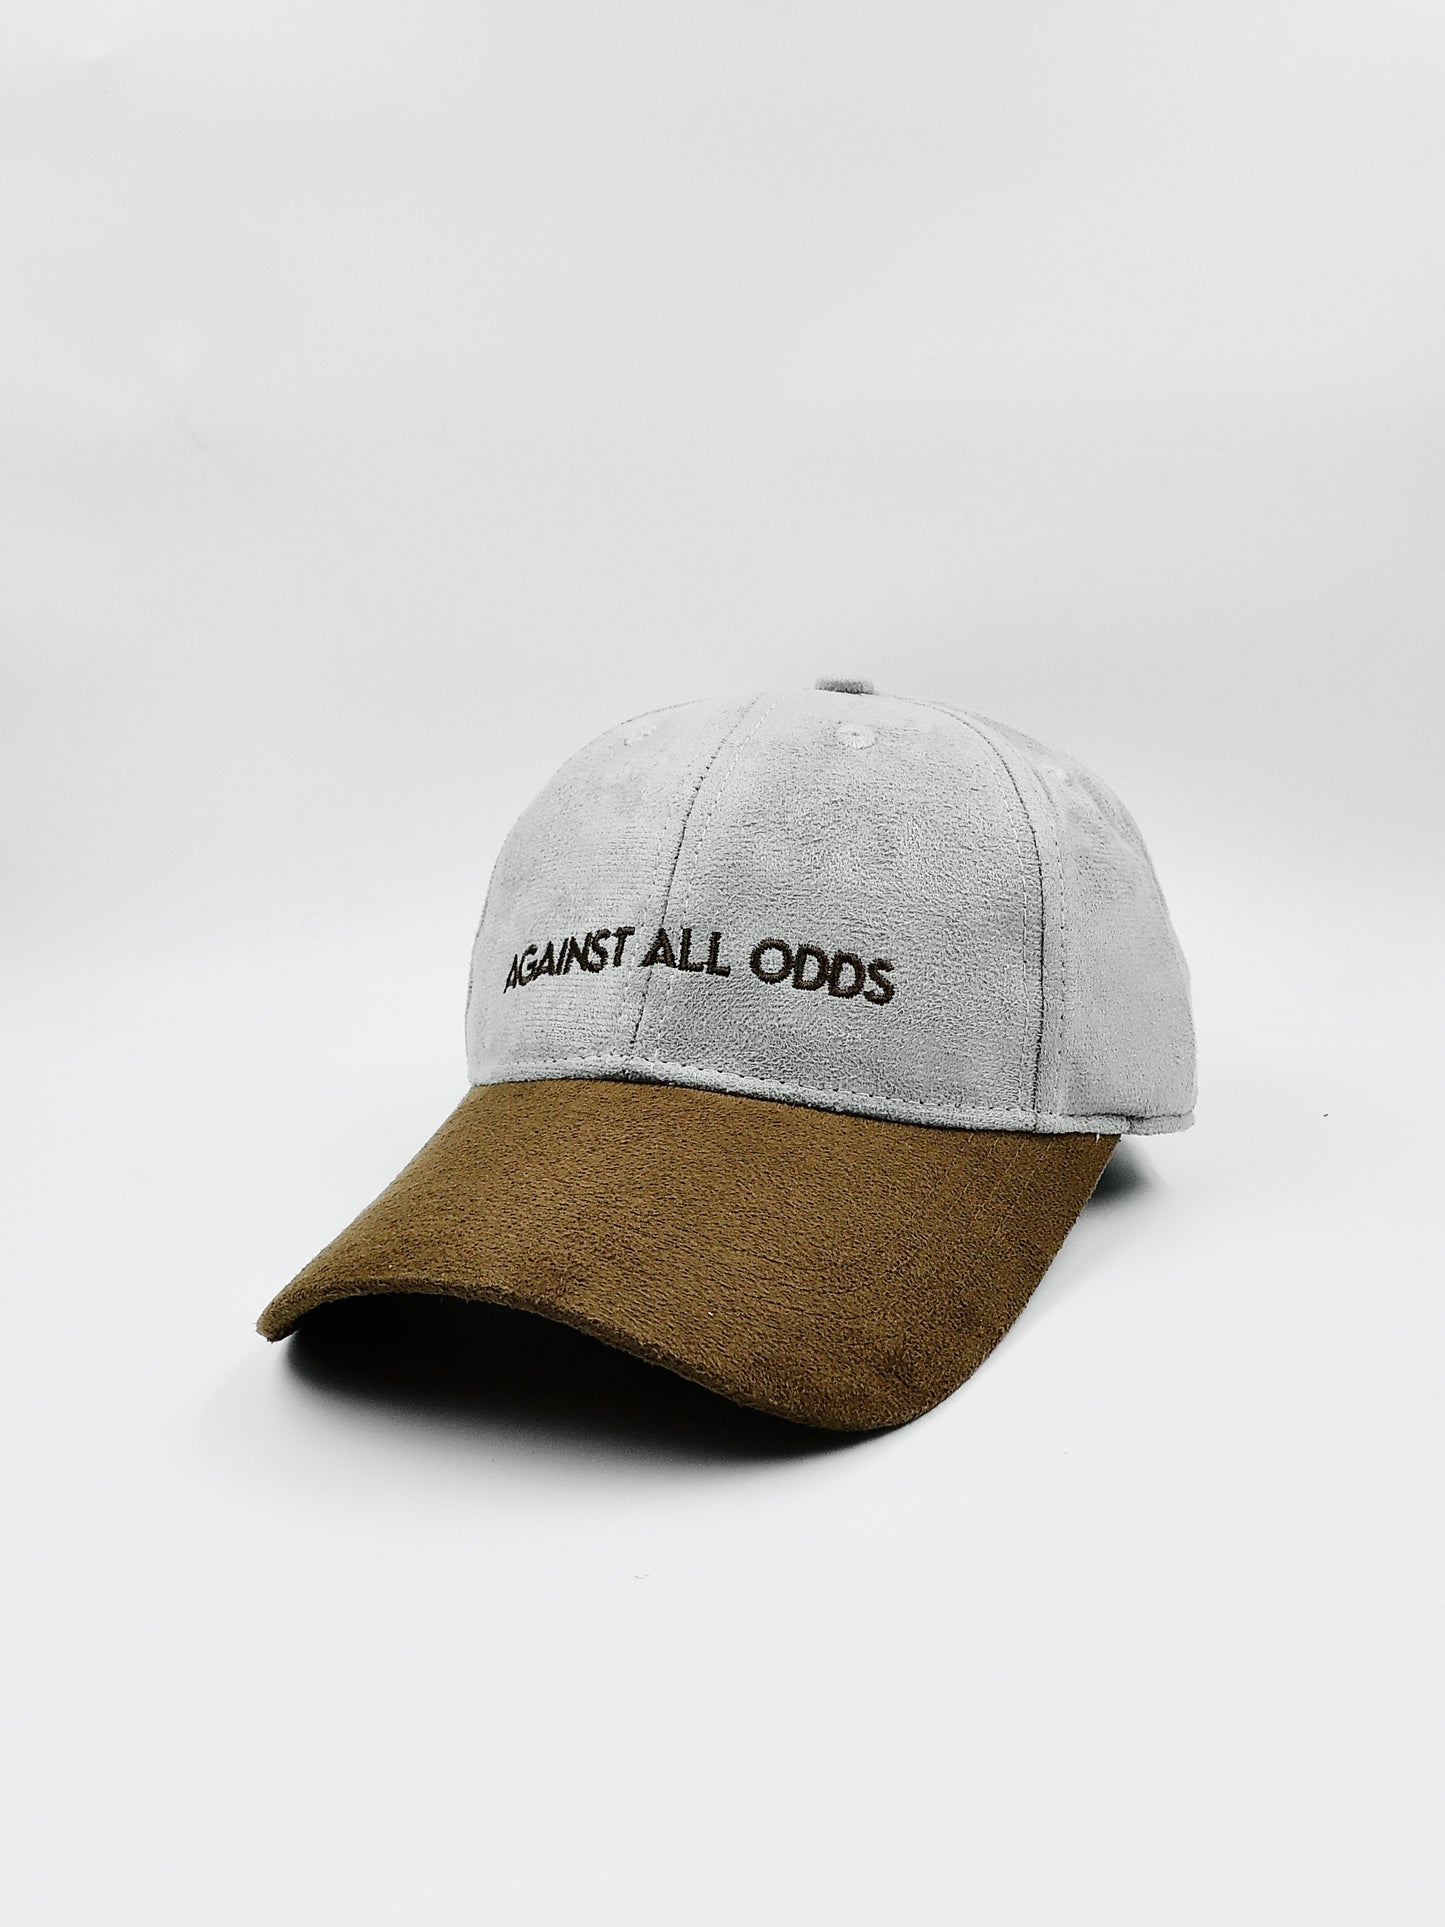 [keyword]-One Word StoreAgainst All Odds - Suede Hat